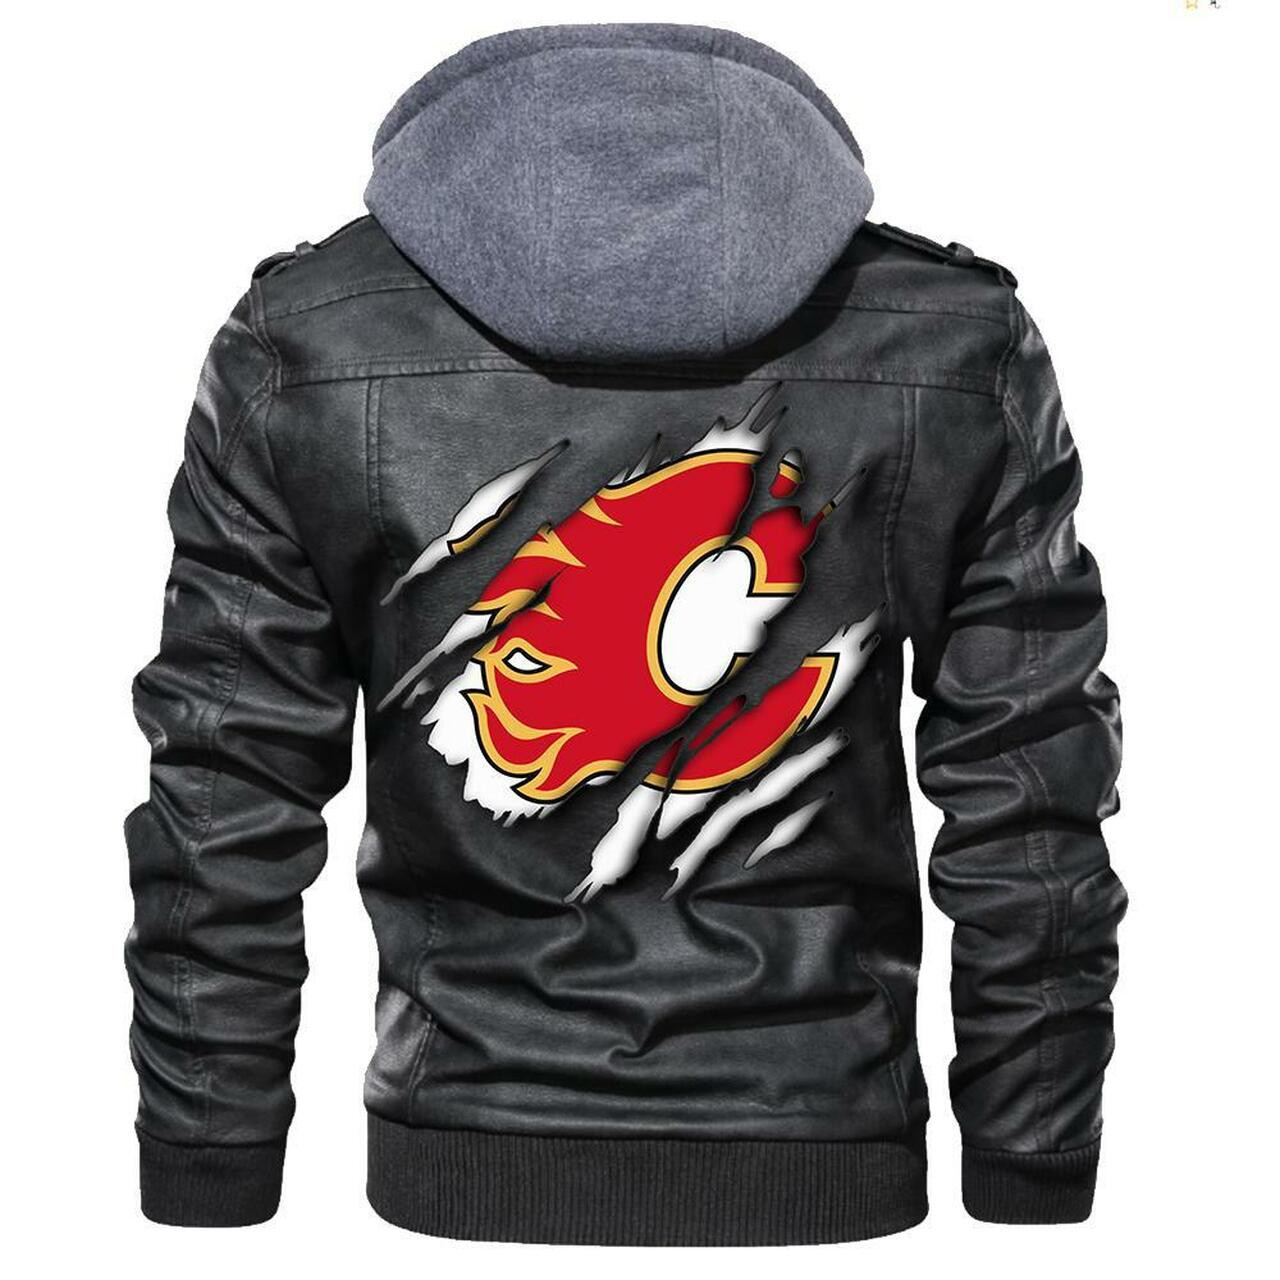 You can find Leather Jacket online at a great price 46